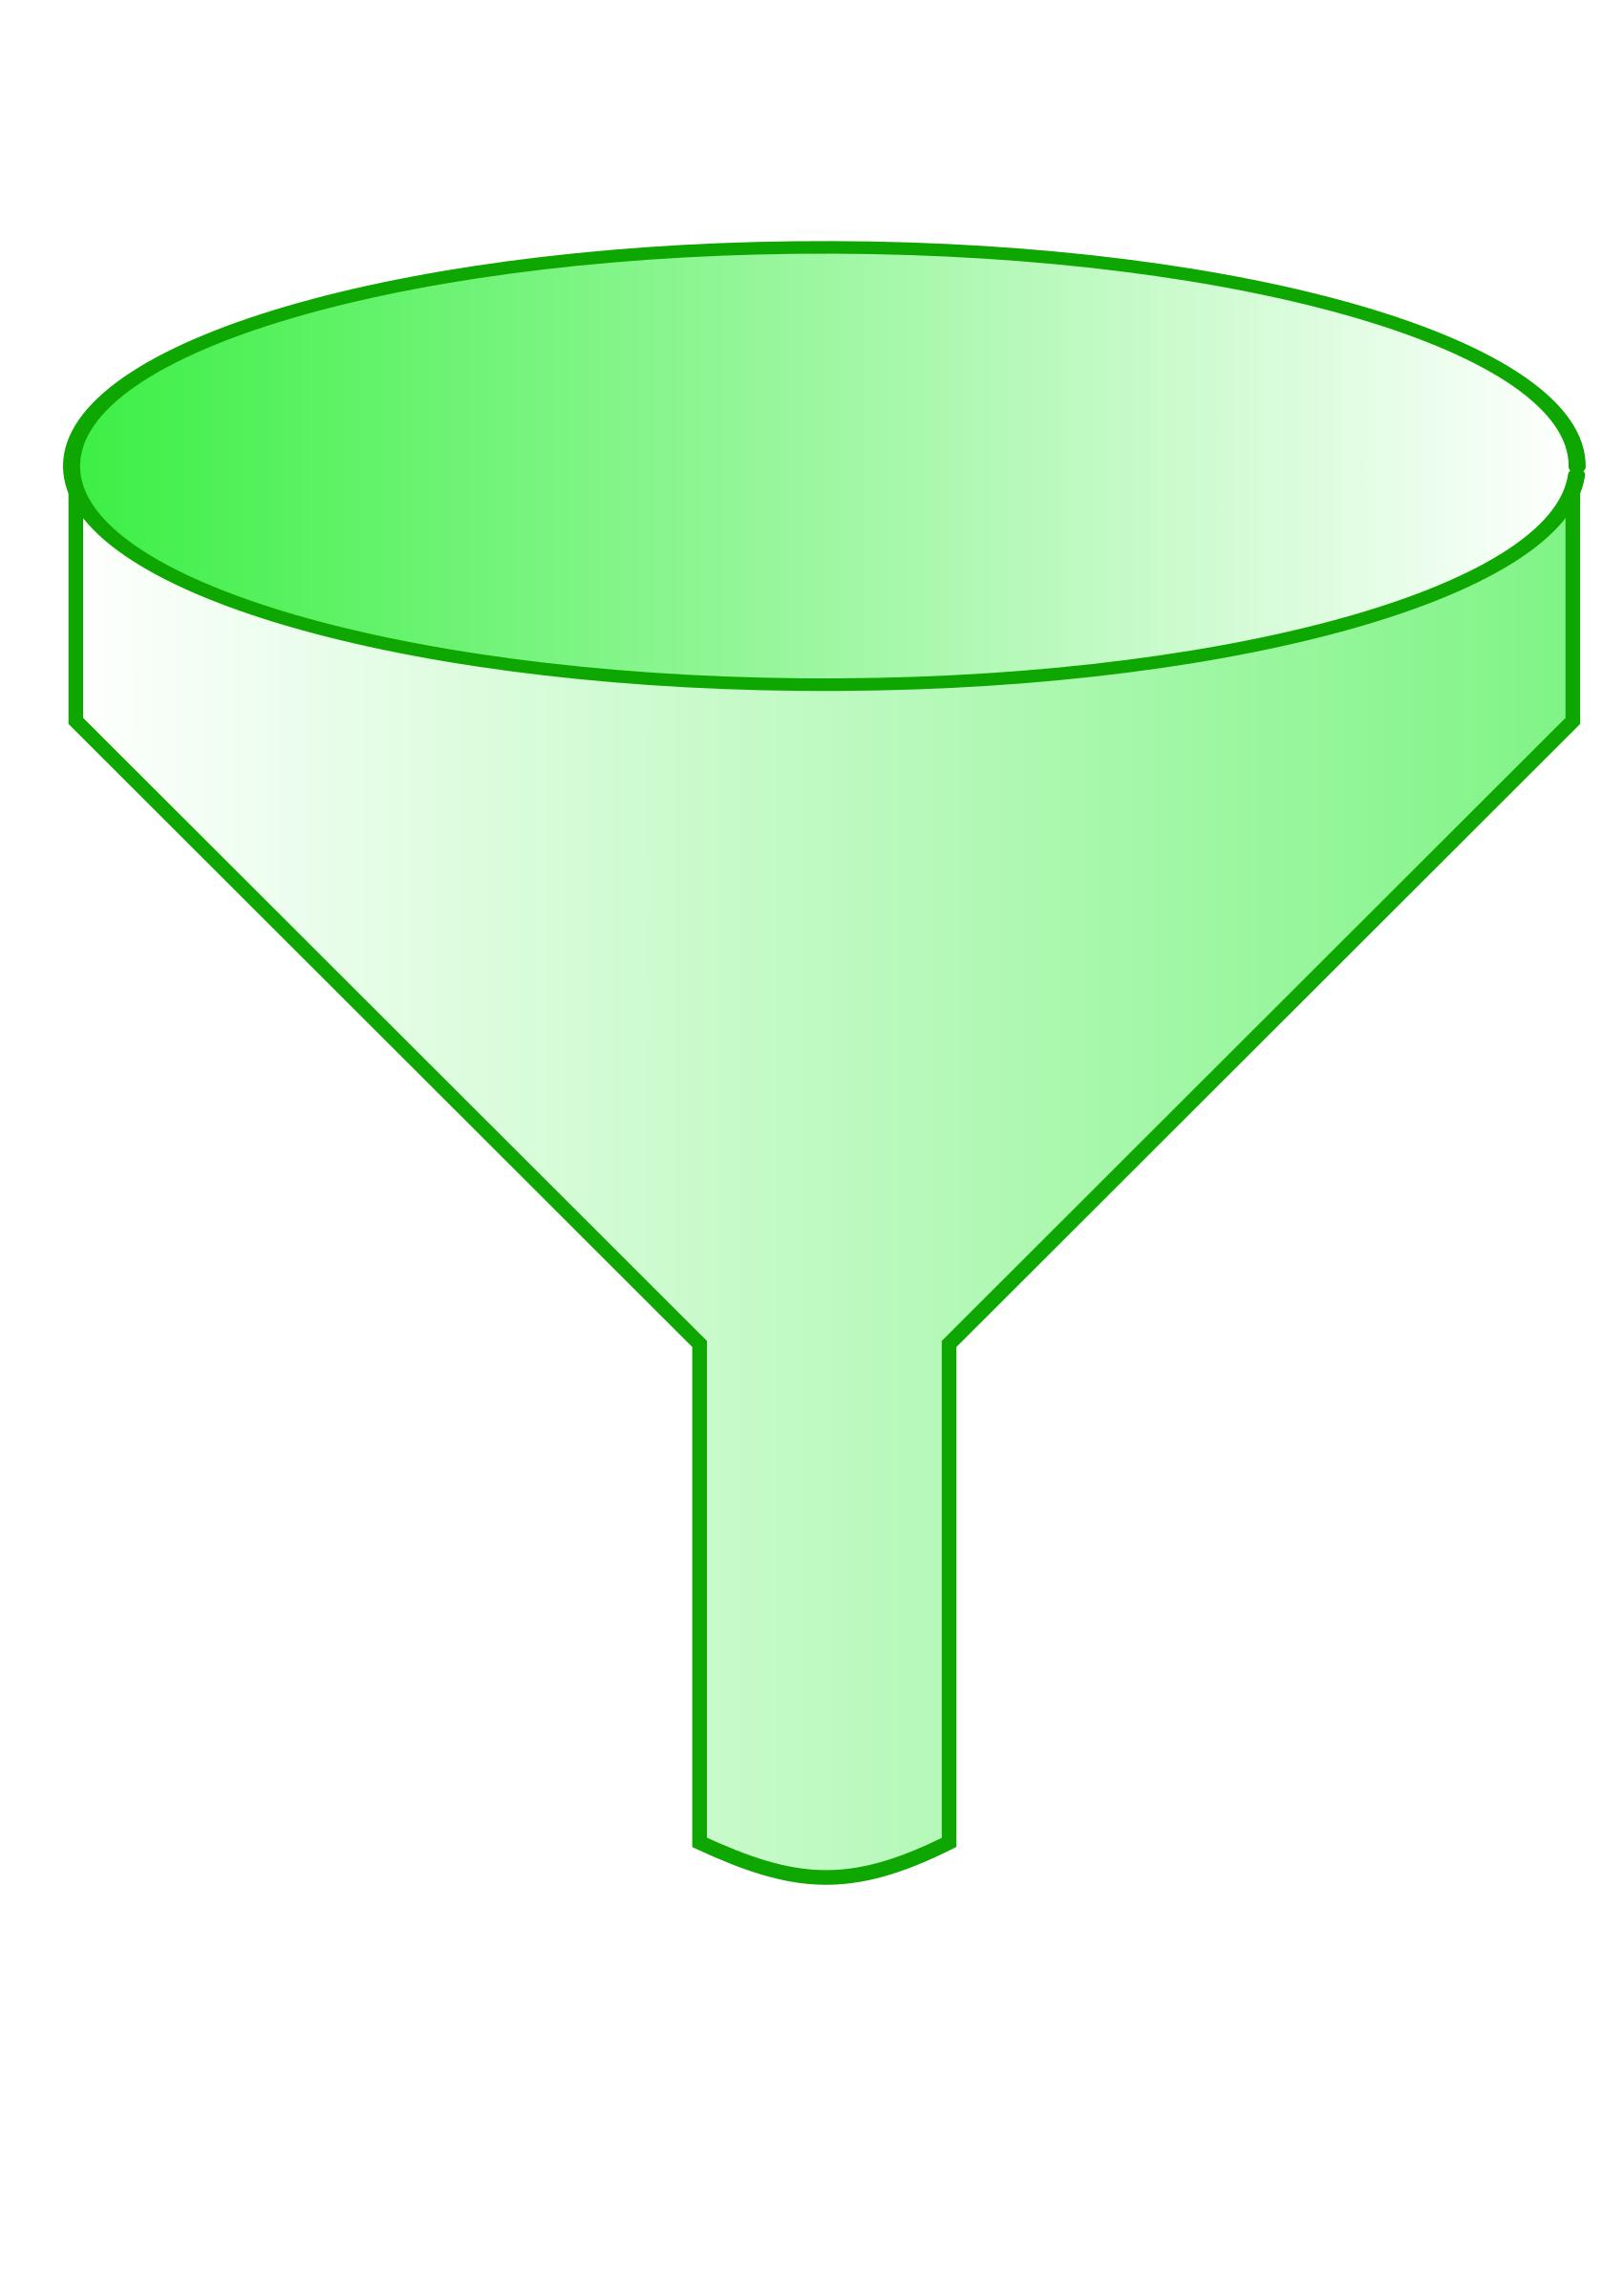 green funnel png